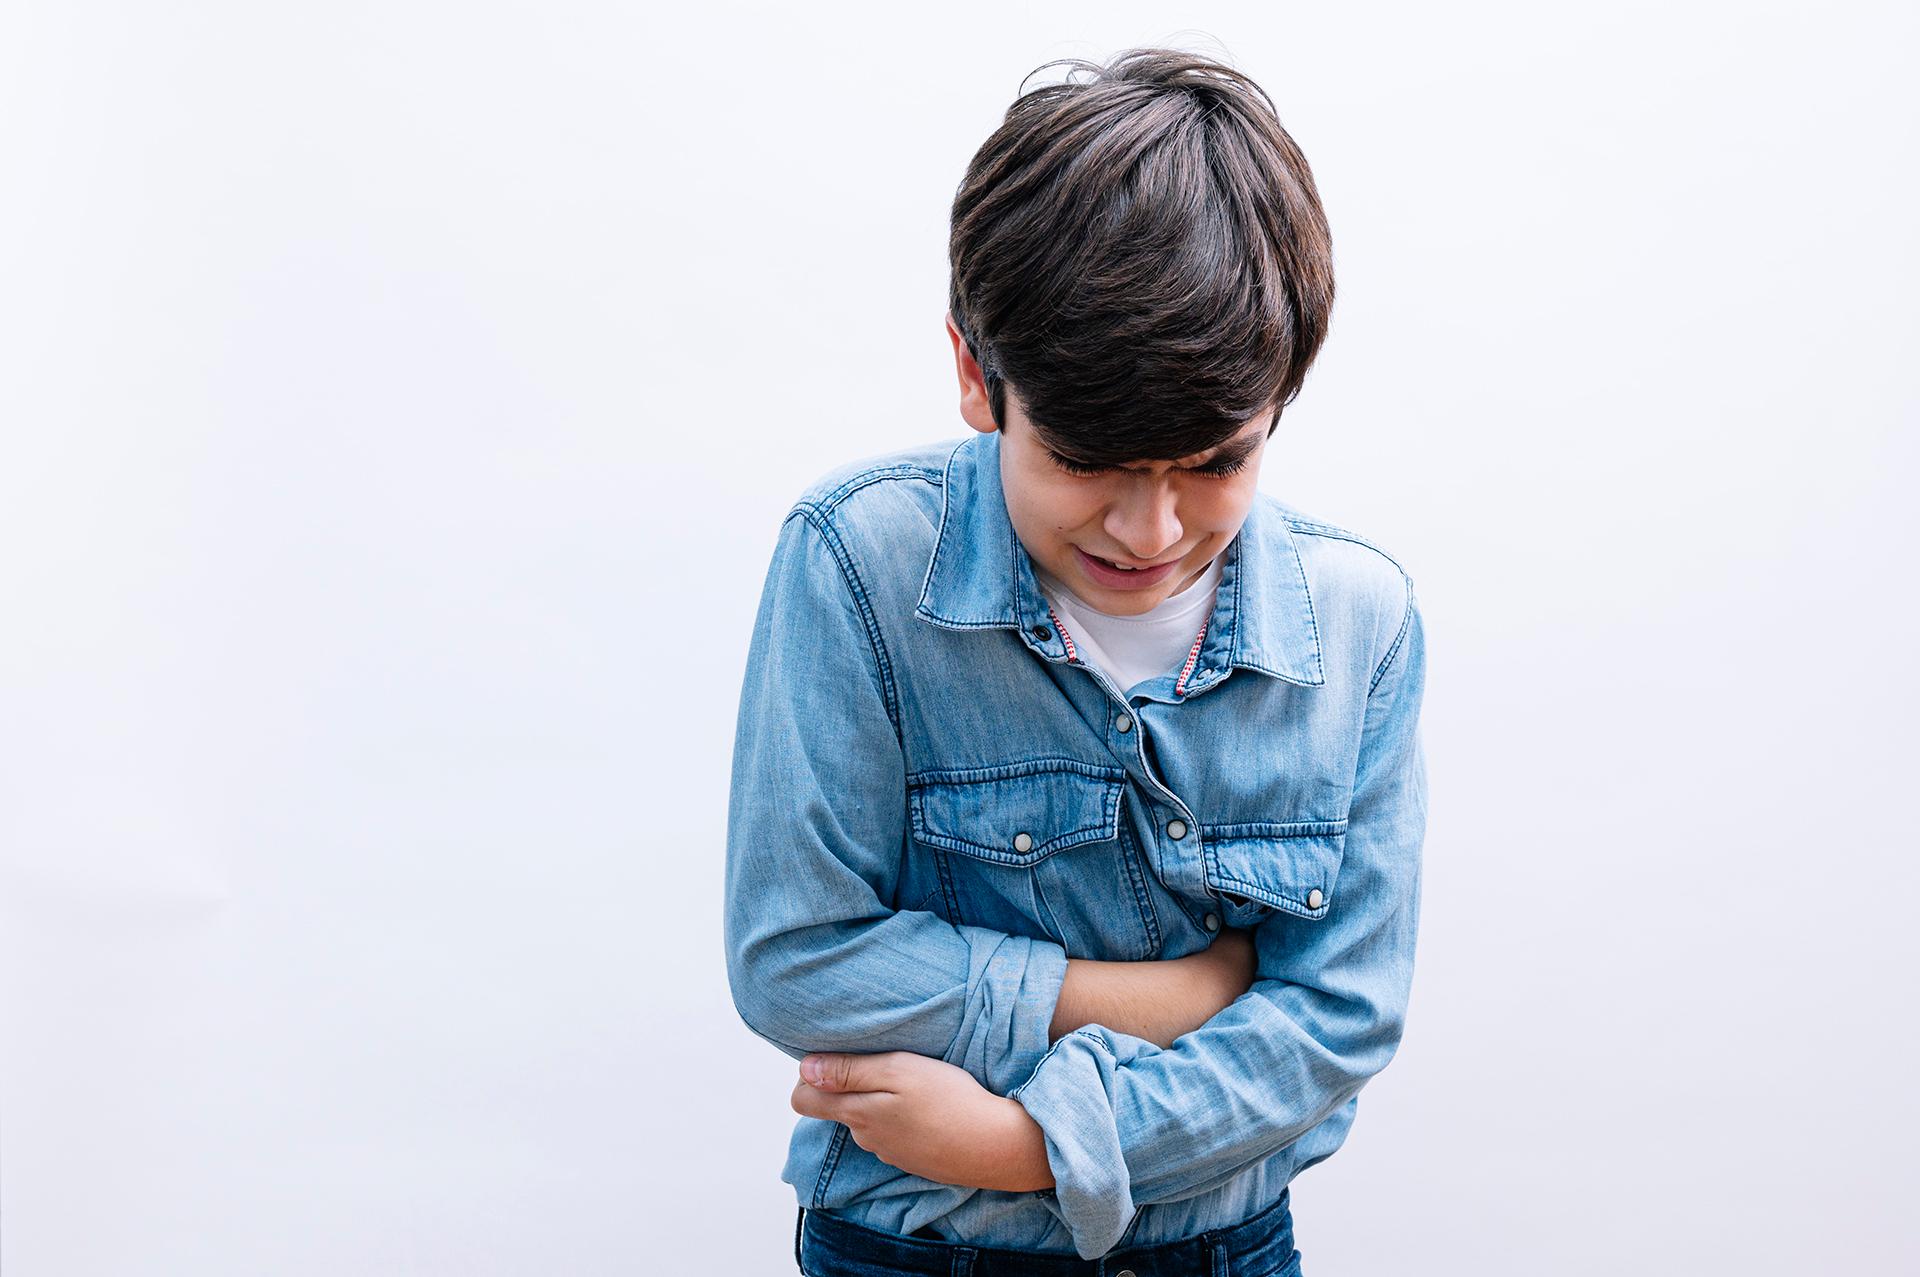 Stomach Infection in Kids: Symptoms, Treatment and Home Remedies